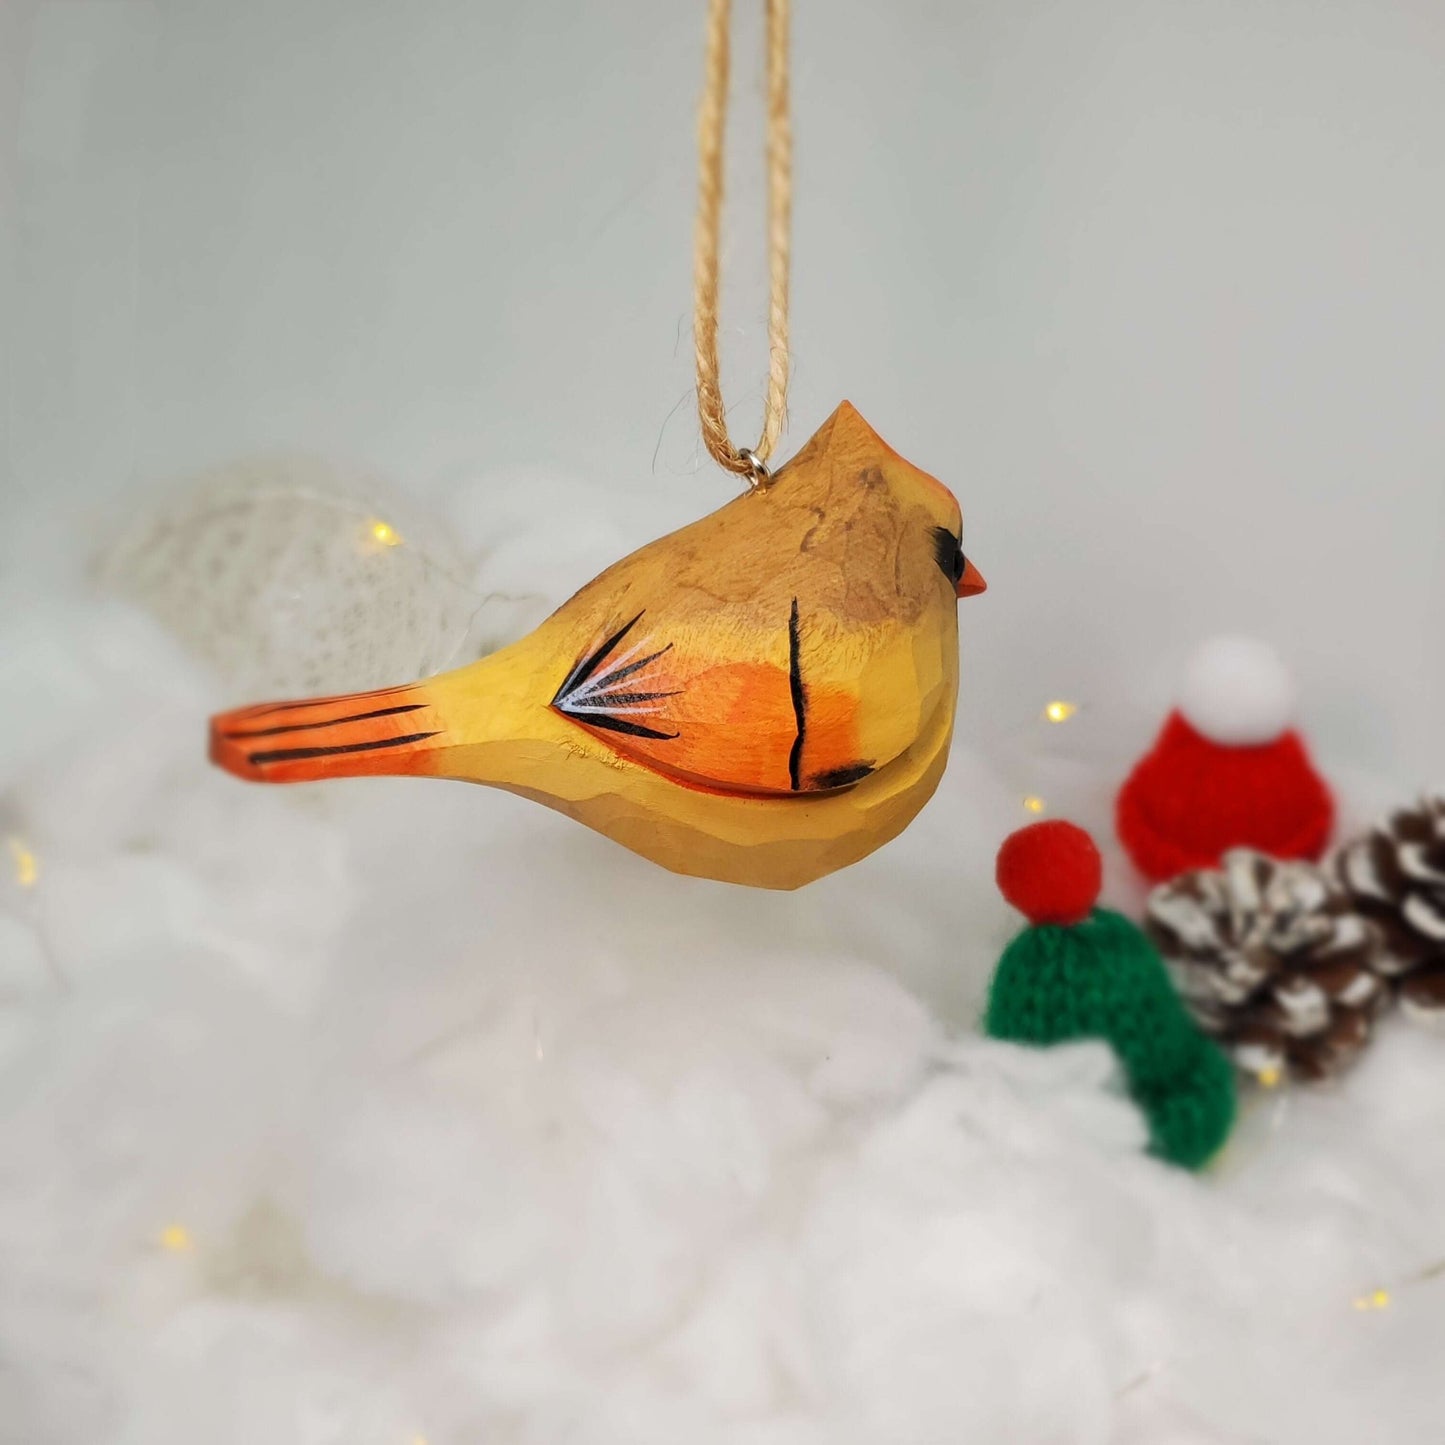 Northern Cardinal Female Ornaments - Wooden Islands